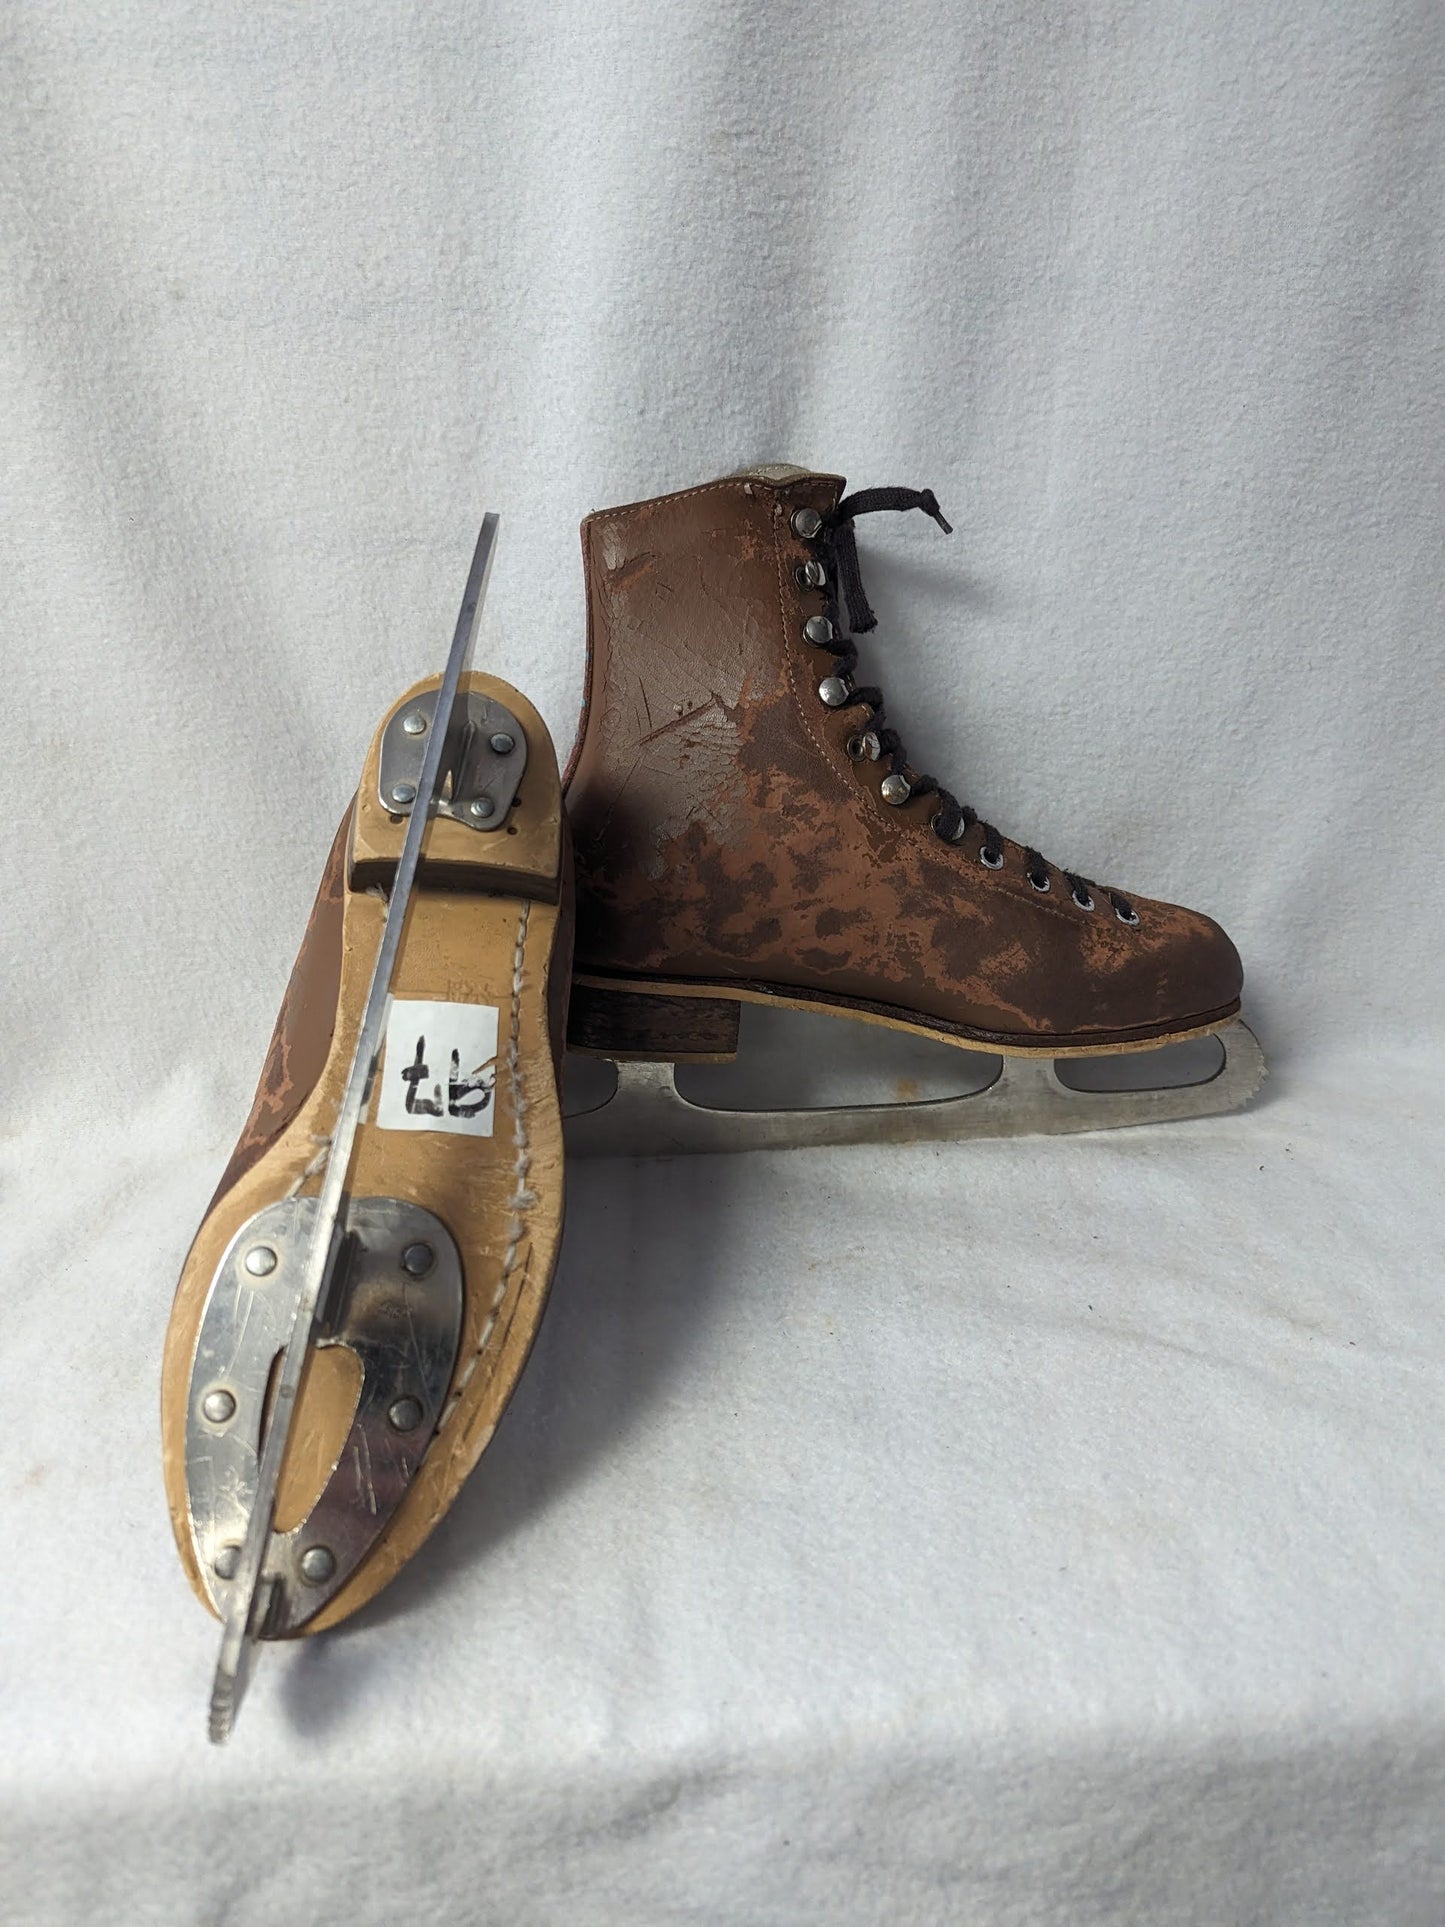 Rink Master Ice Skates Size 5 Color Brown Condition Used